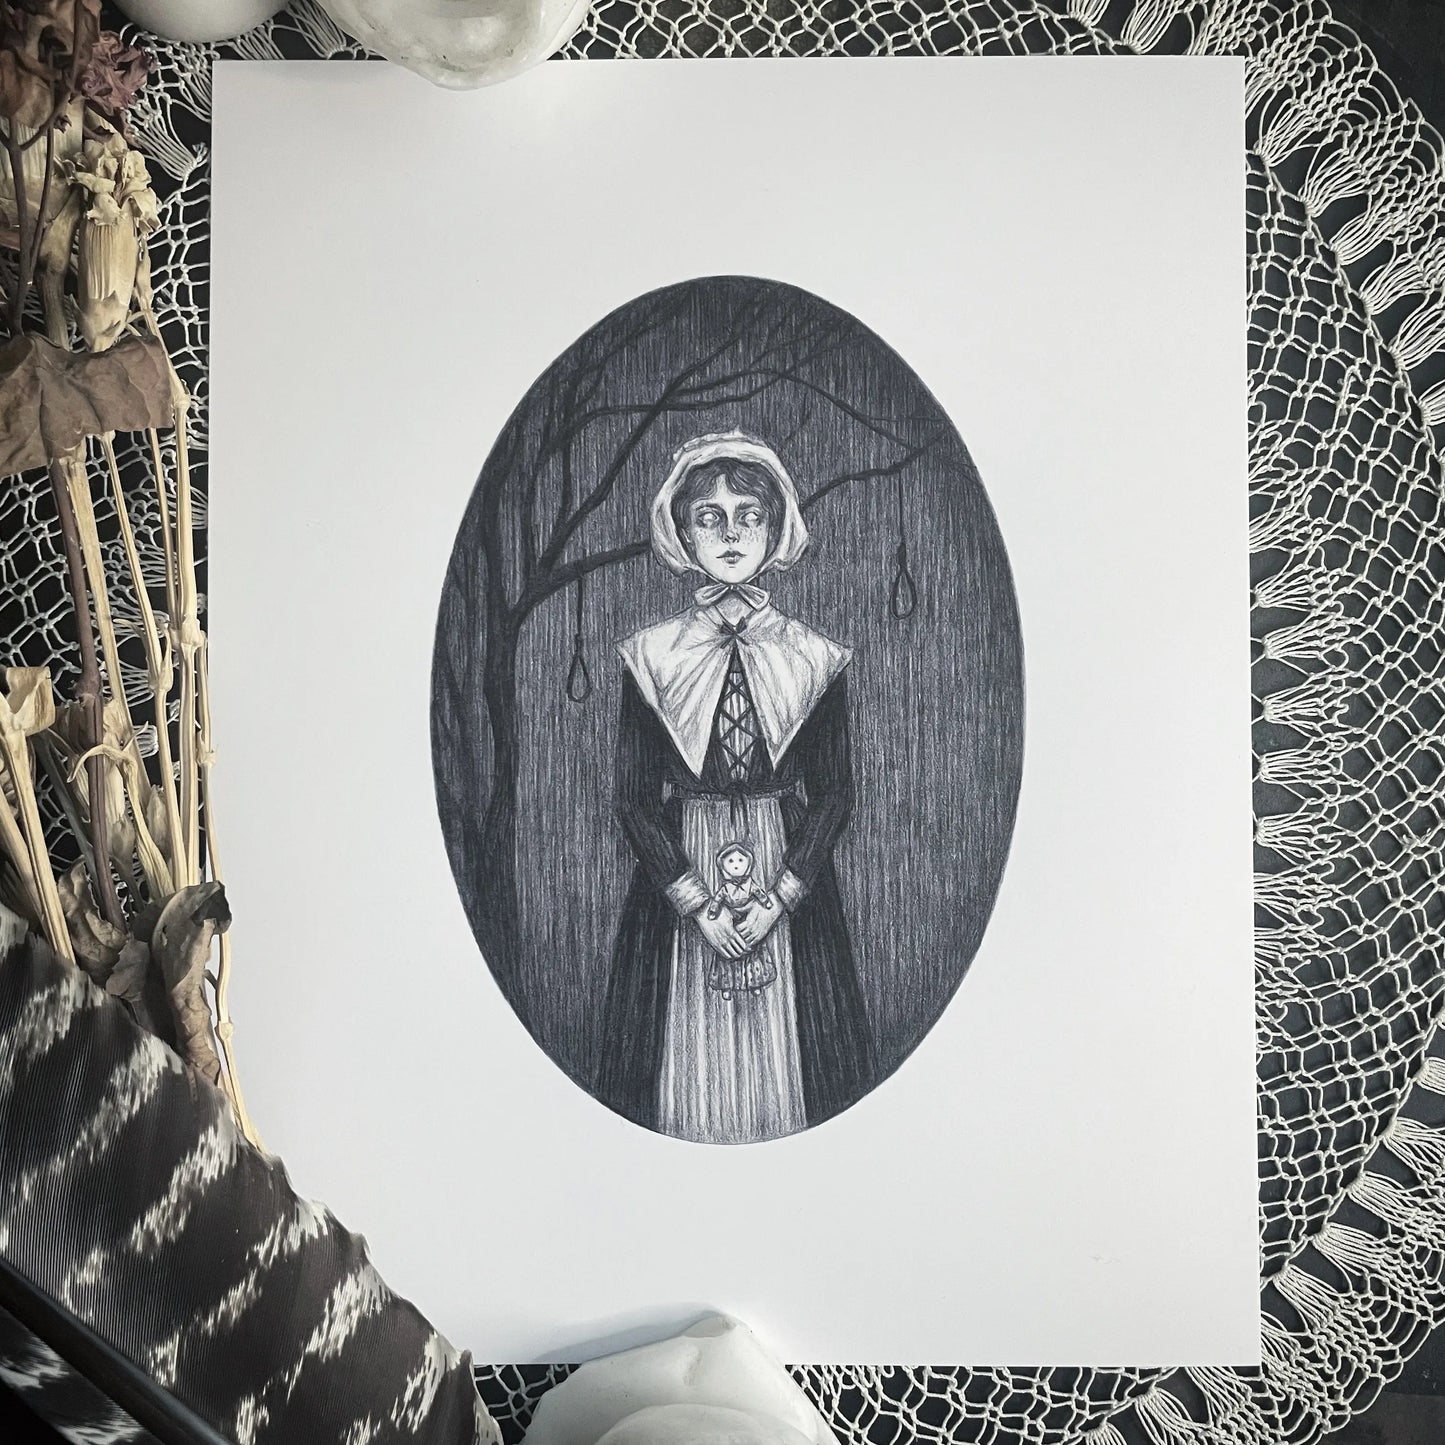 The Poppet - Fine Art Print - Salem Witch 5x7" by Caitlin McCarthy